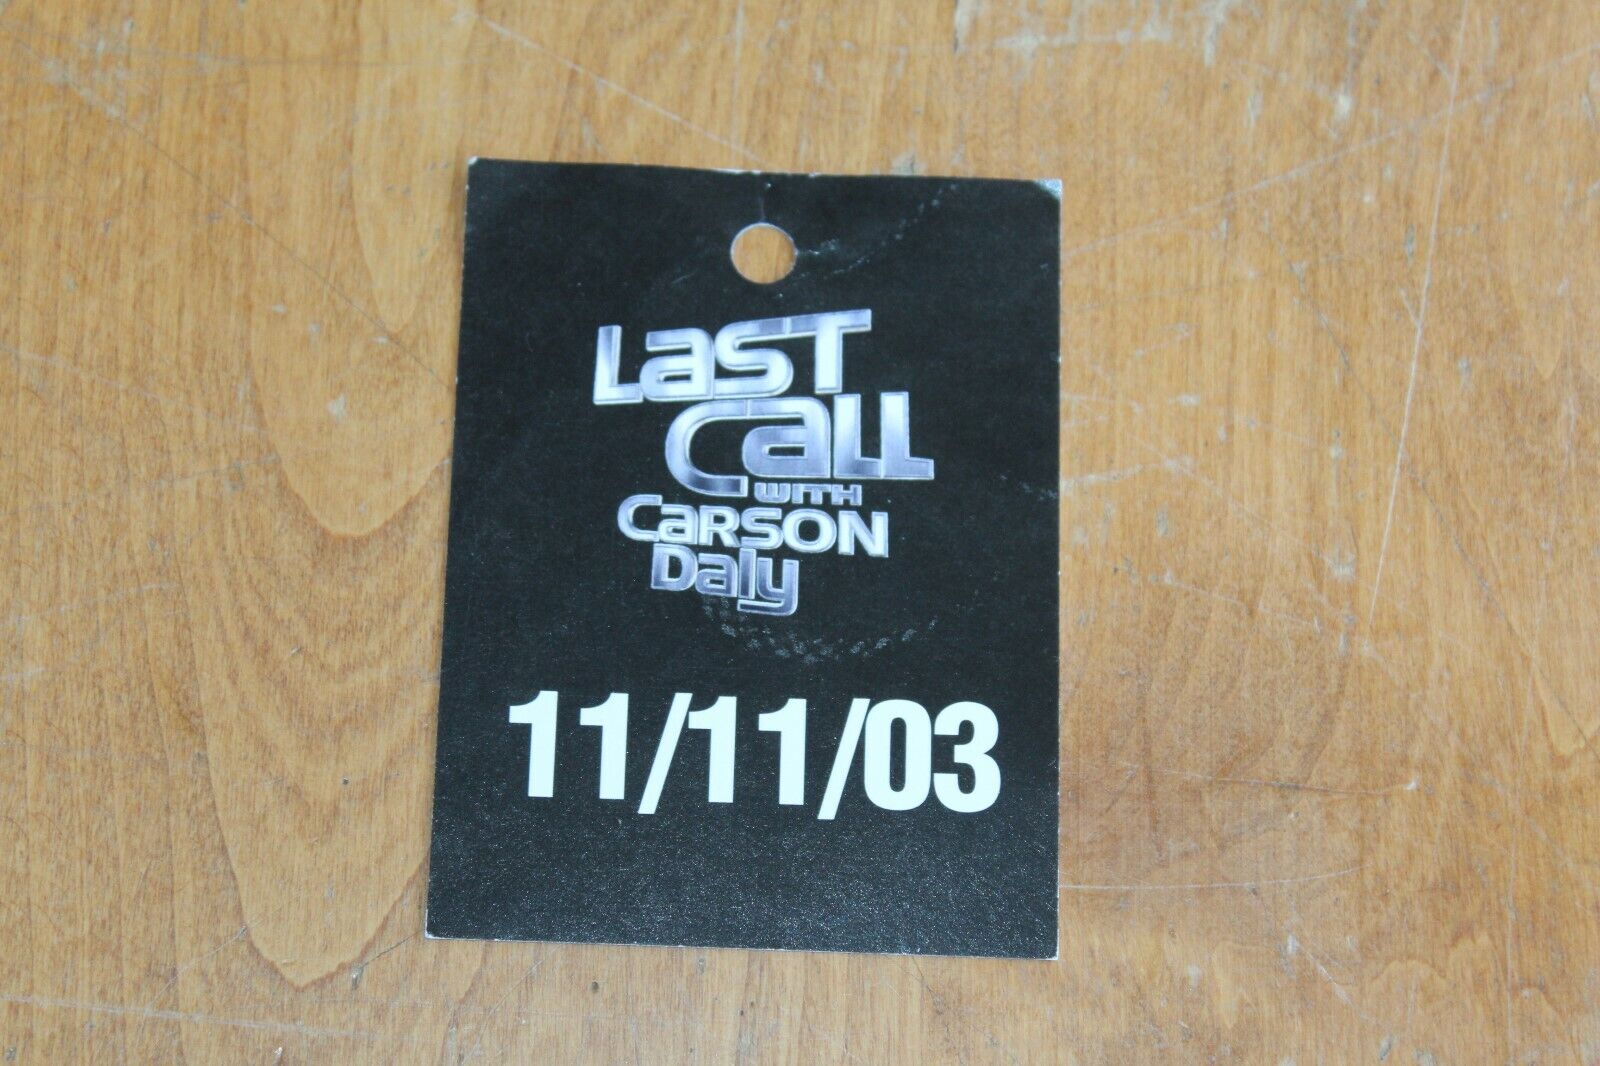 Johnny Carson Daly TV show - Backstage Pass - FREE SHIPPING